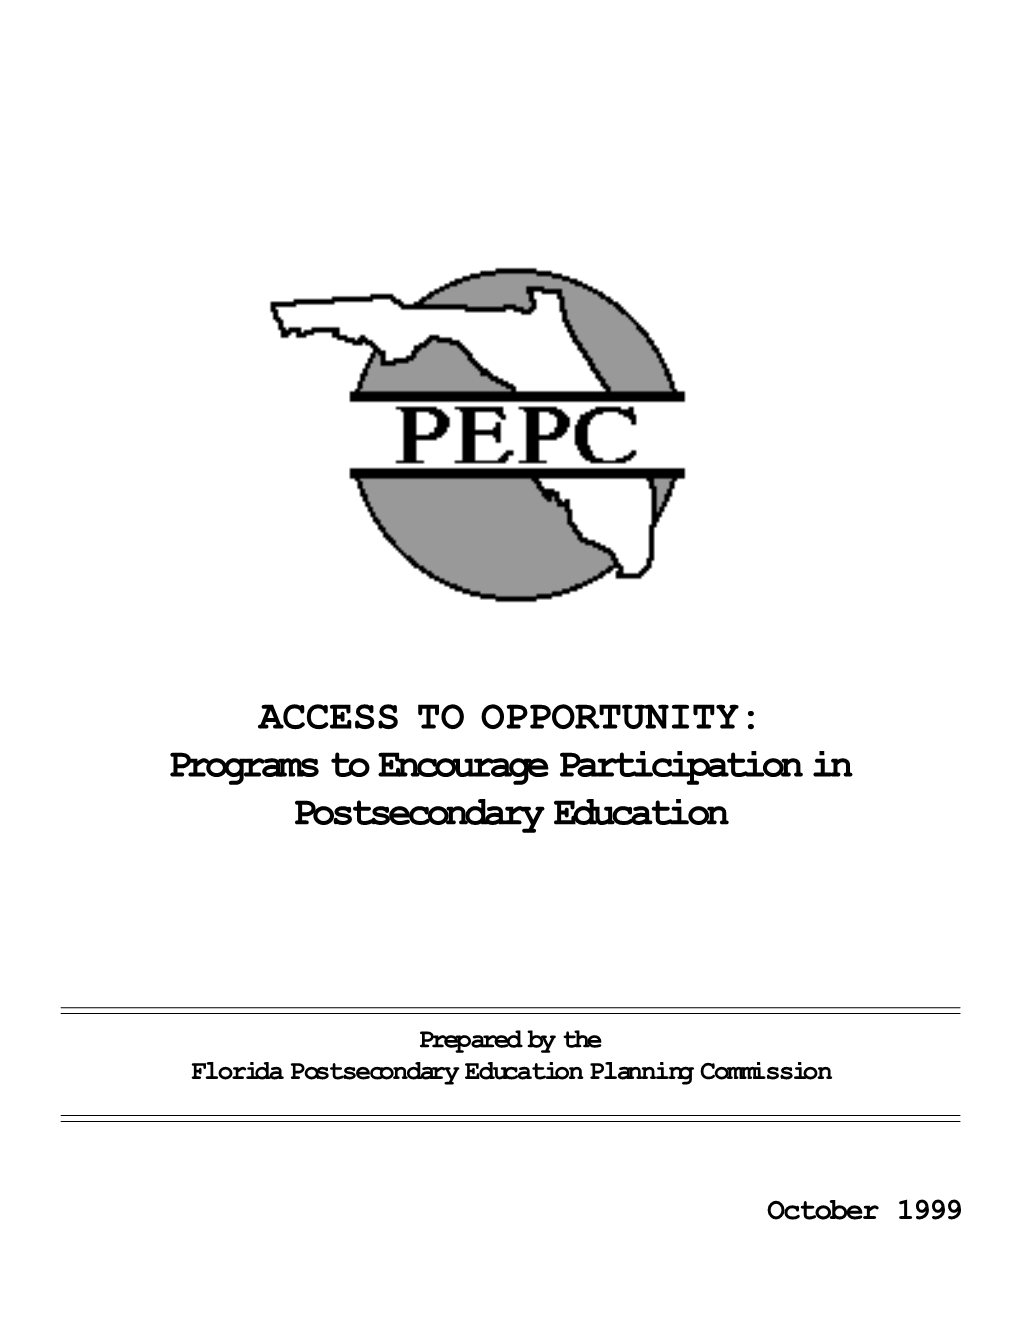 Programs to Encourage Participation in Postsecondary Education